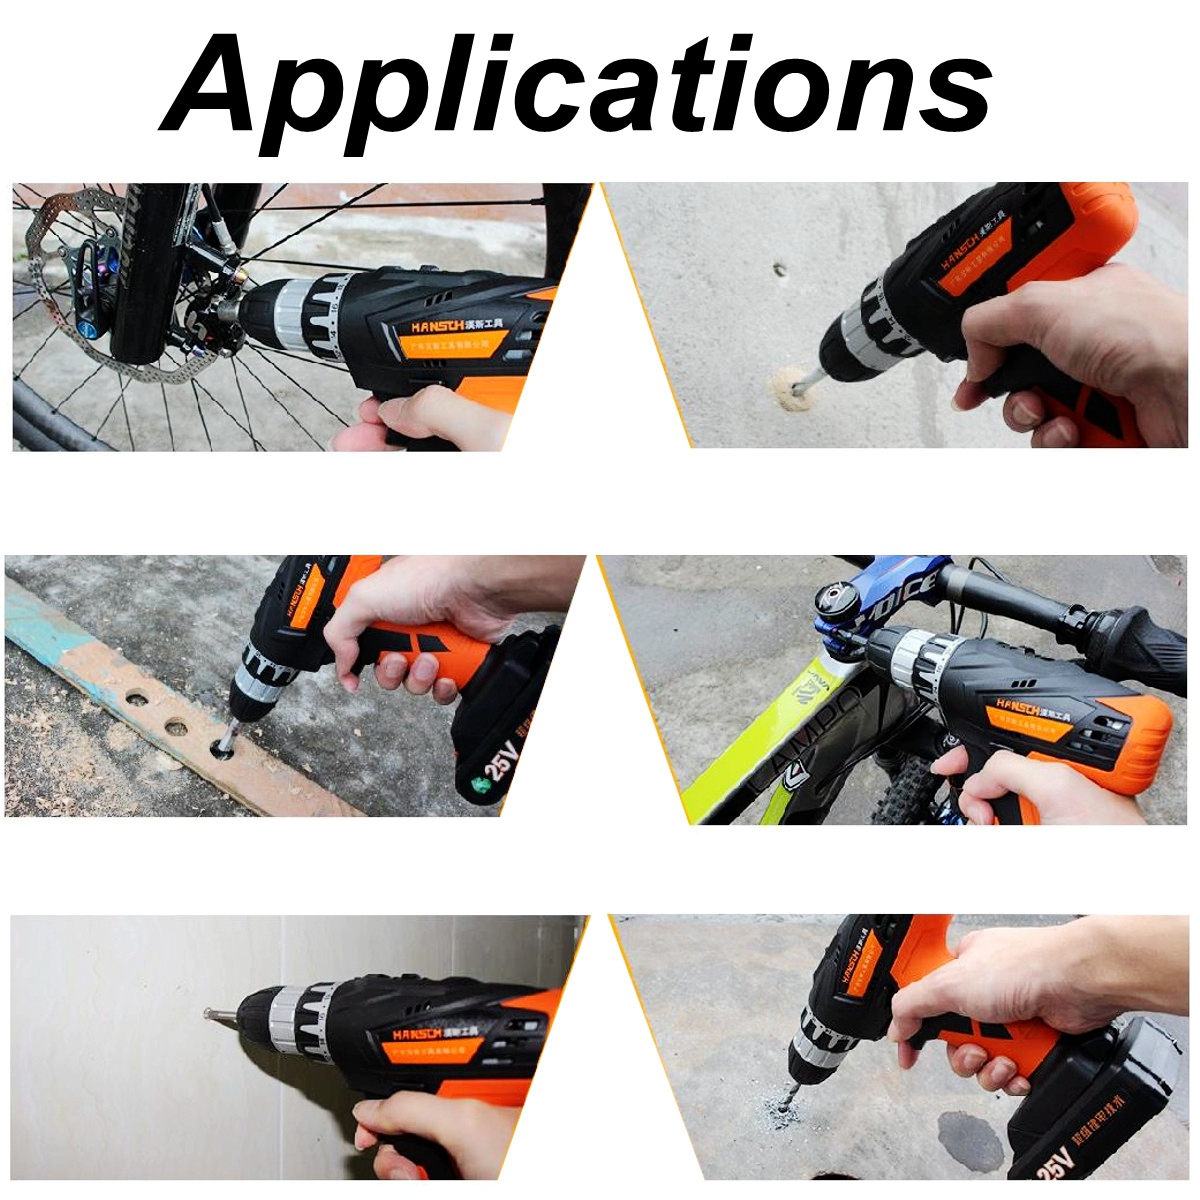 25V-Dual-Speed-Cordless-Drill-Driver-Electric-Drill-Rechargable-Power-Drills-Driver-Tool-1414380-4